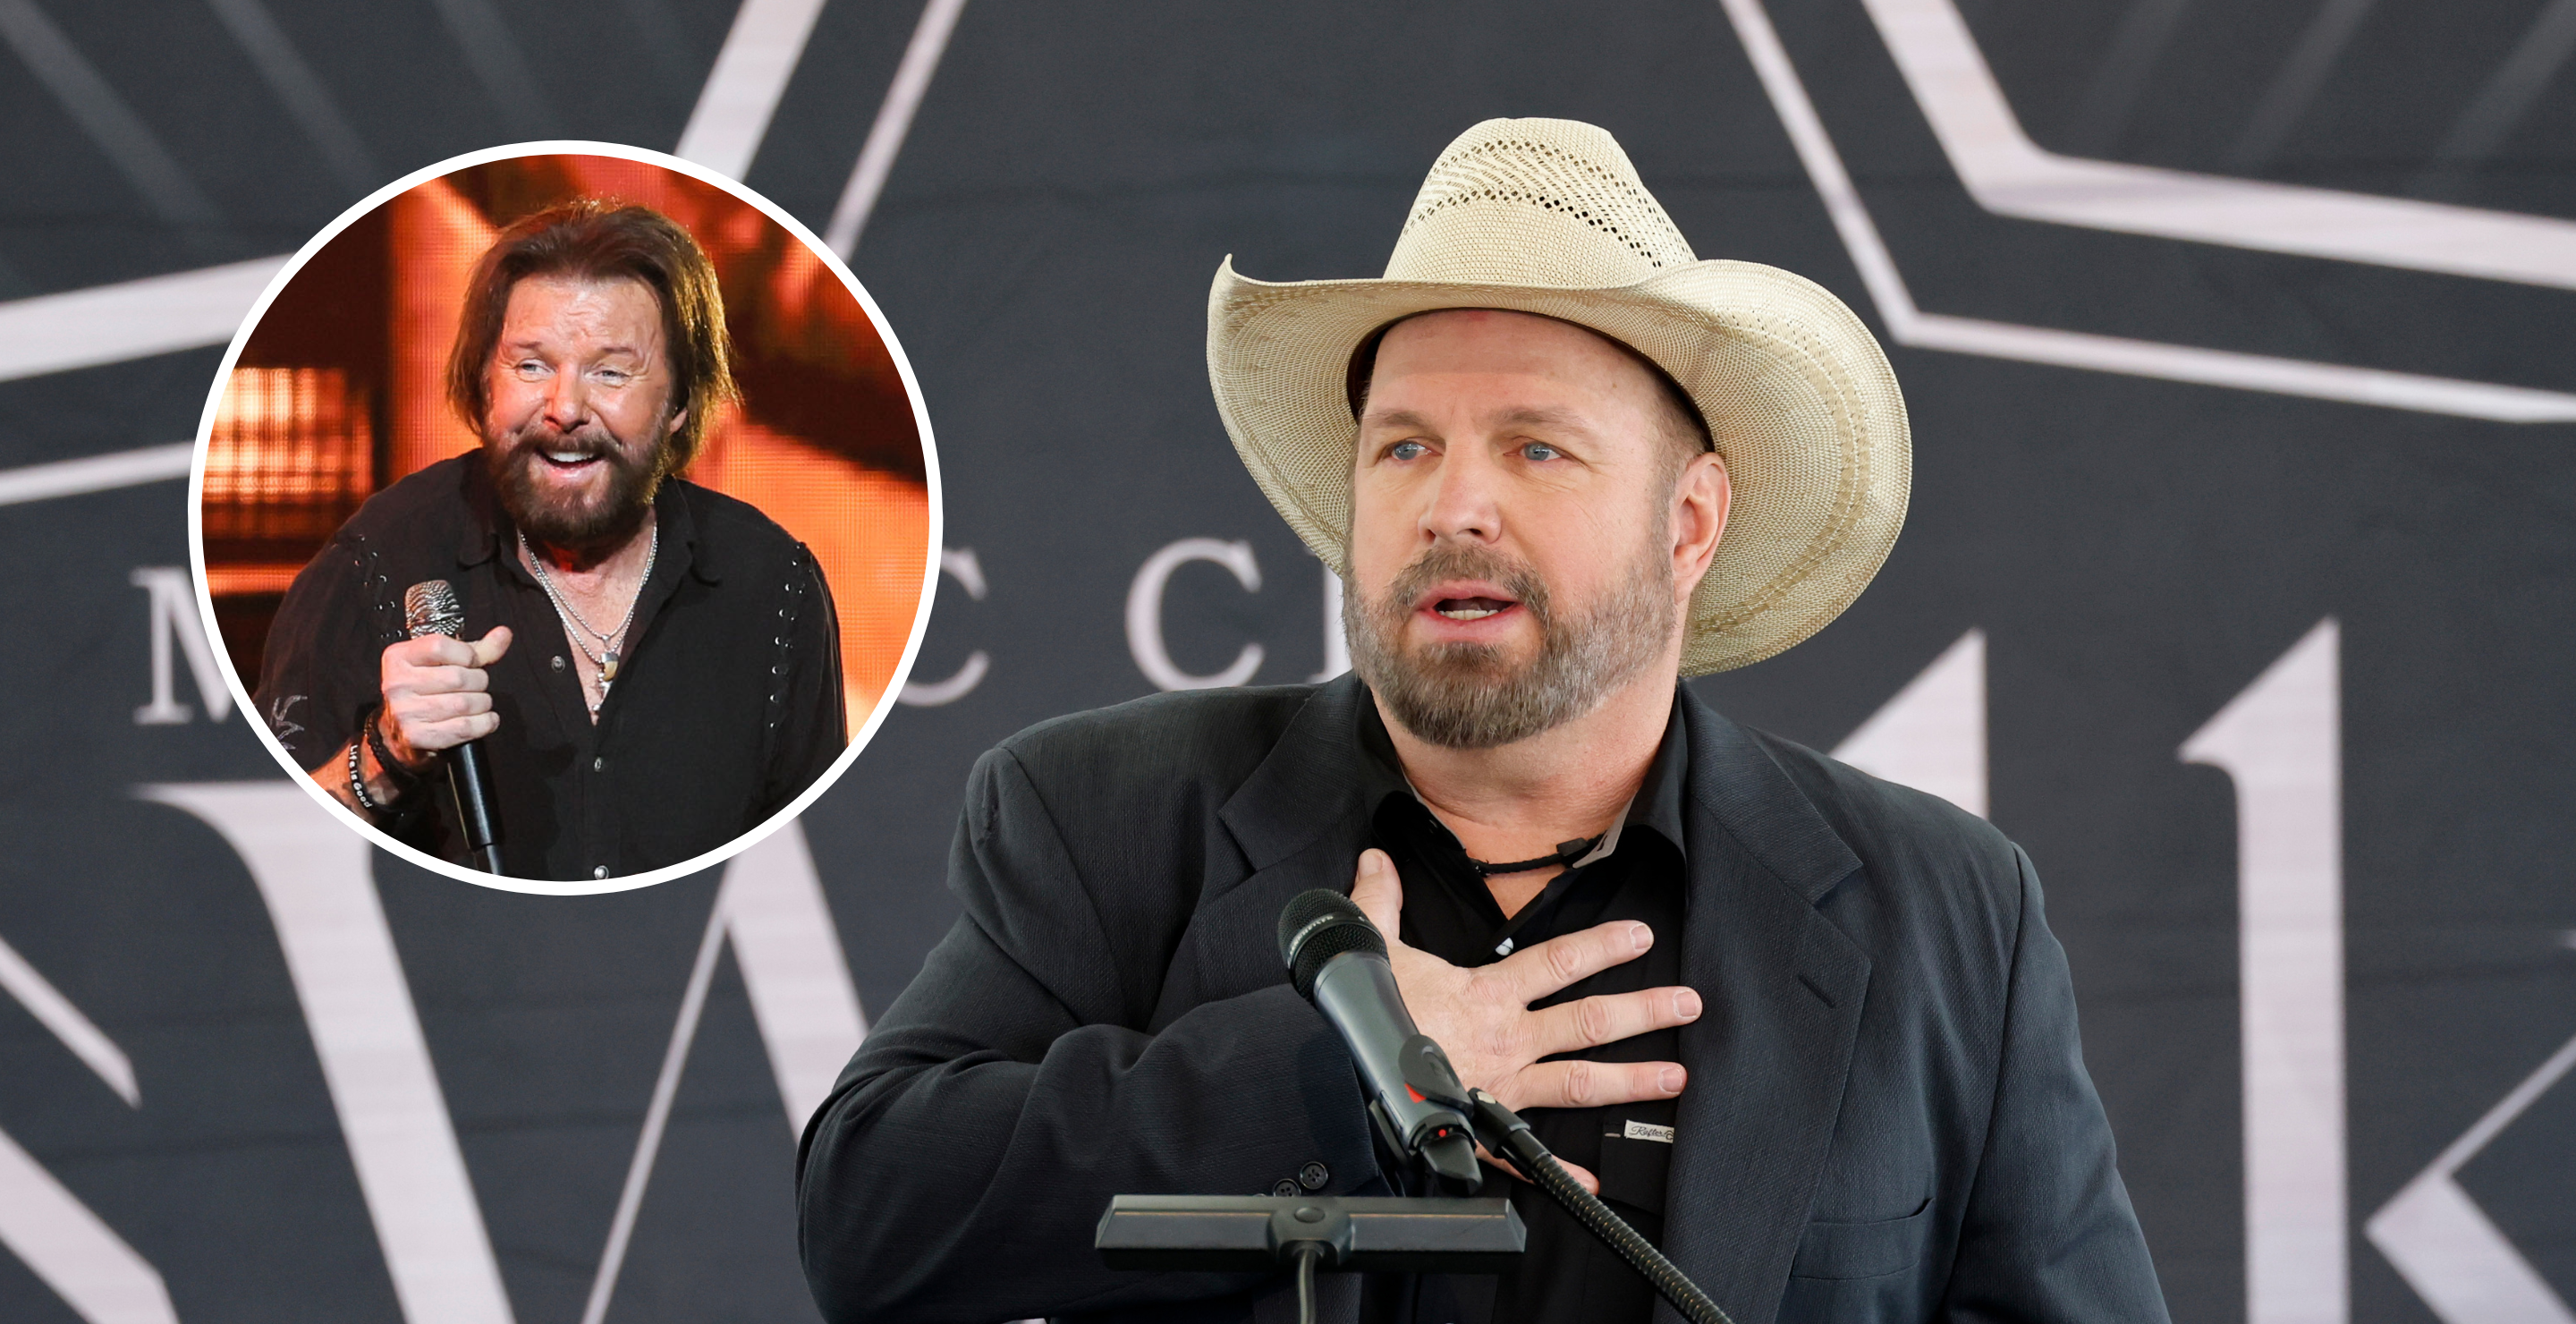 Garth Brooks To Release New Single With Ronnie Dunn, “Rodeo Man,” This  Monday